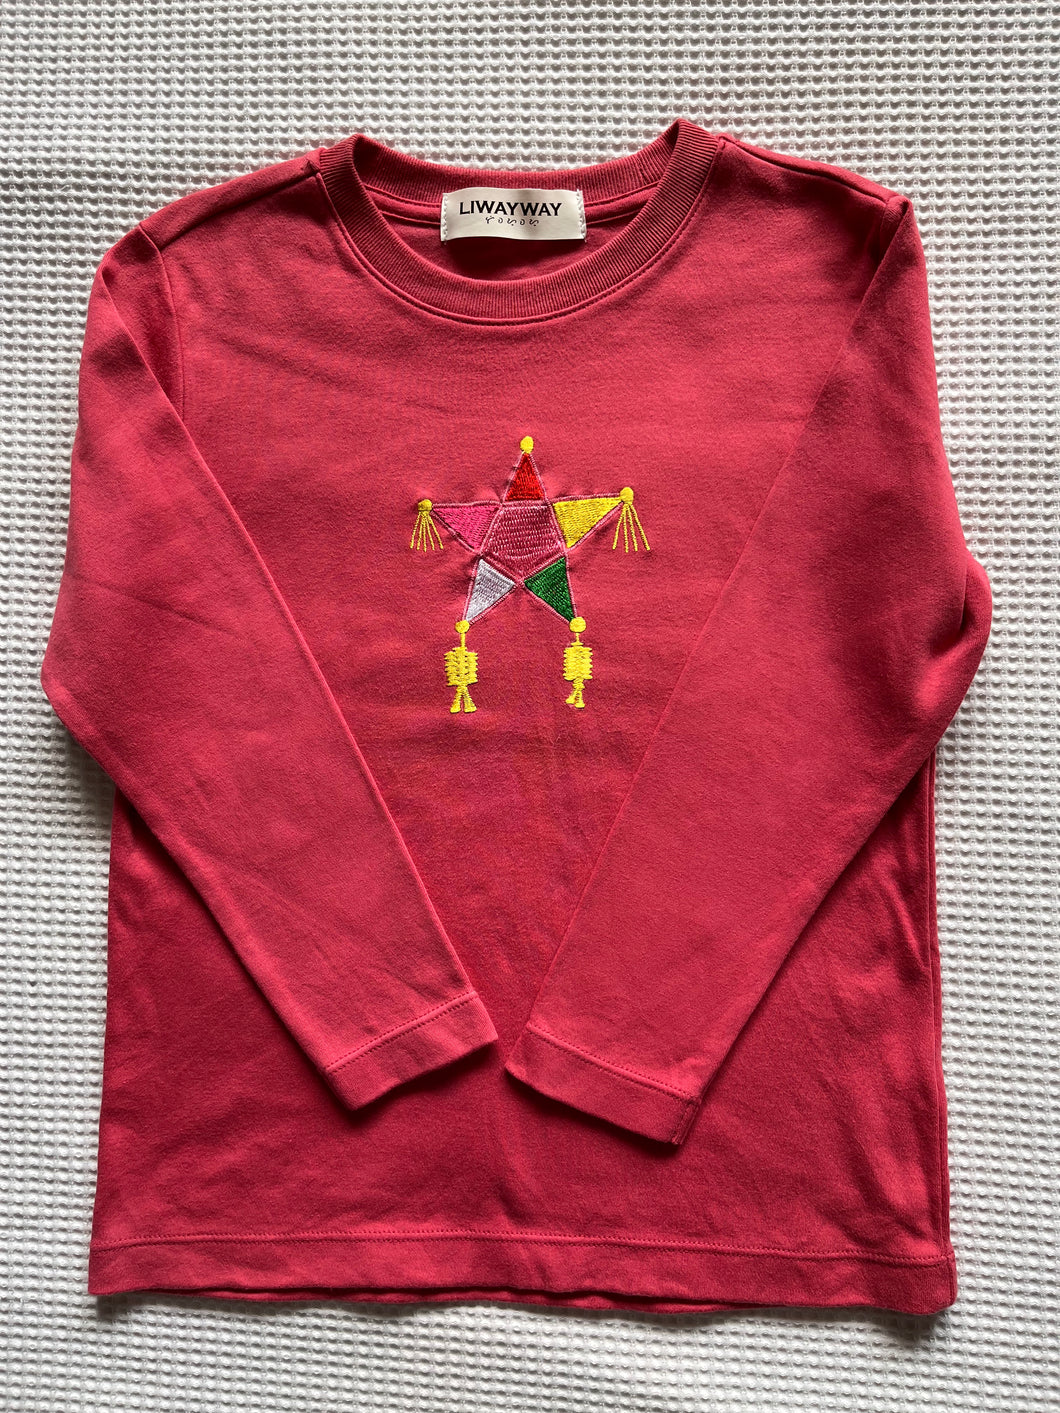 Parol sweaters 05 for 2-5yrs old